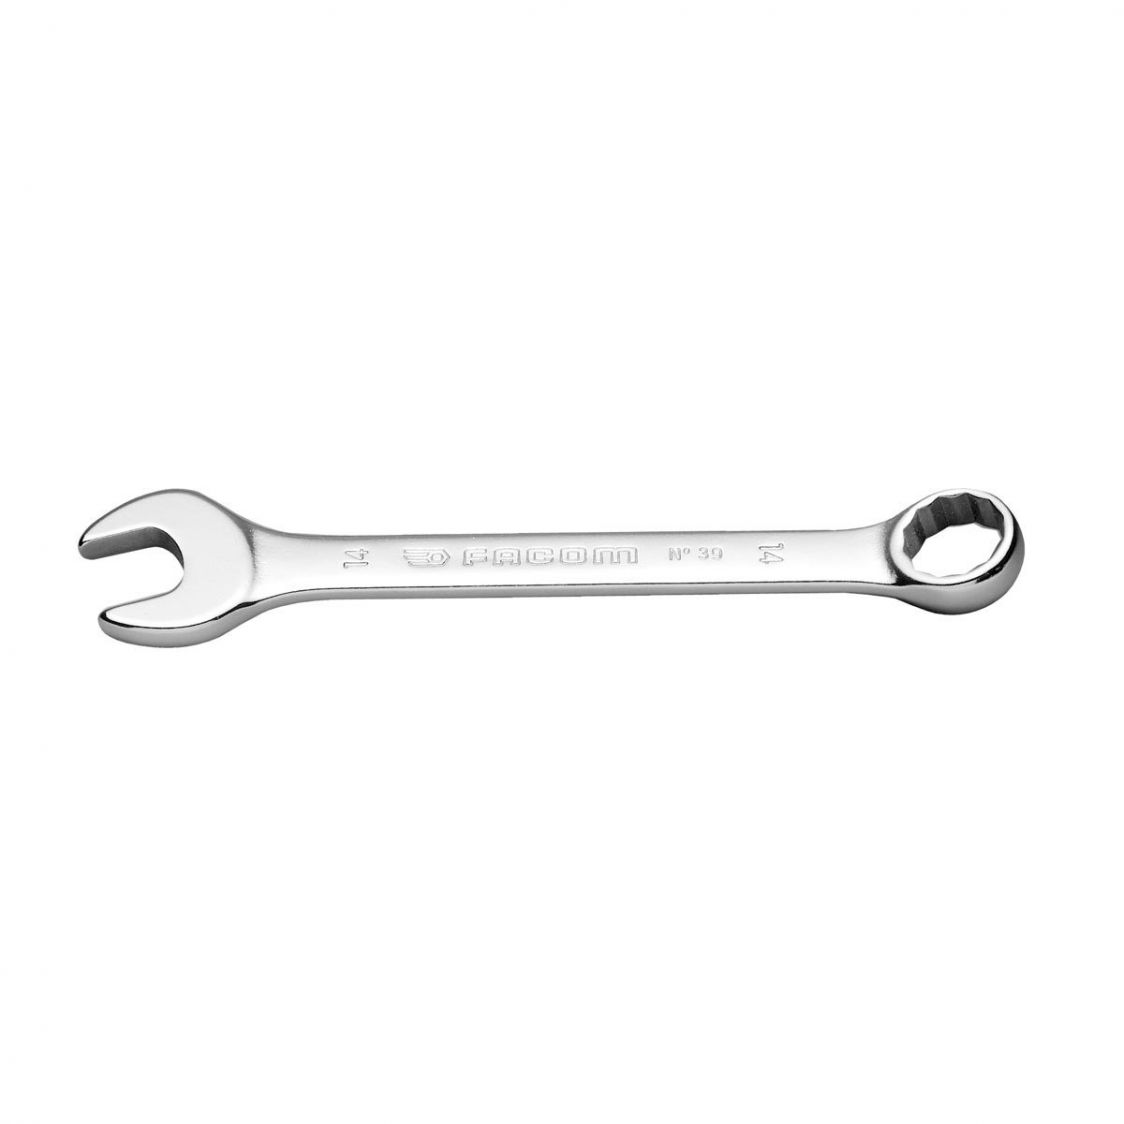 FACOM 39.8 - 8mm Metric Stubby Combination Spanner